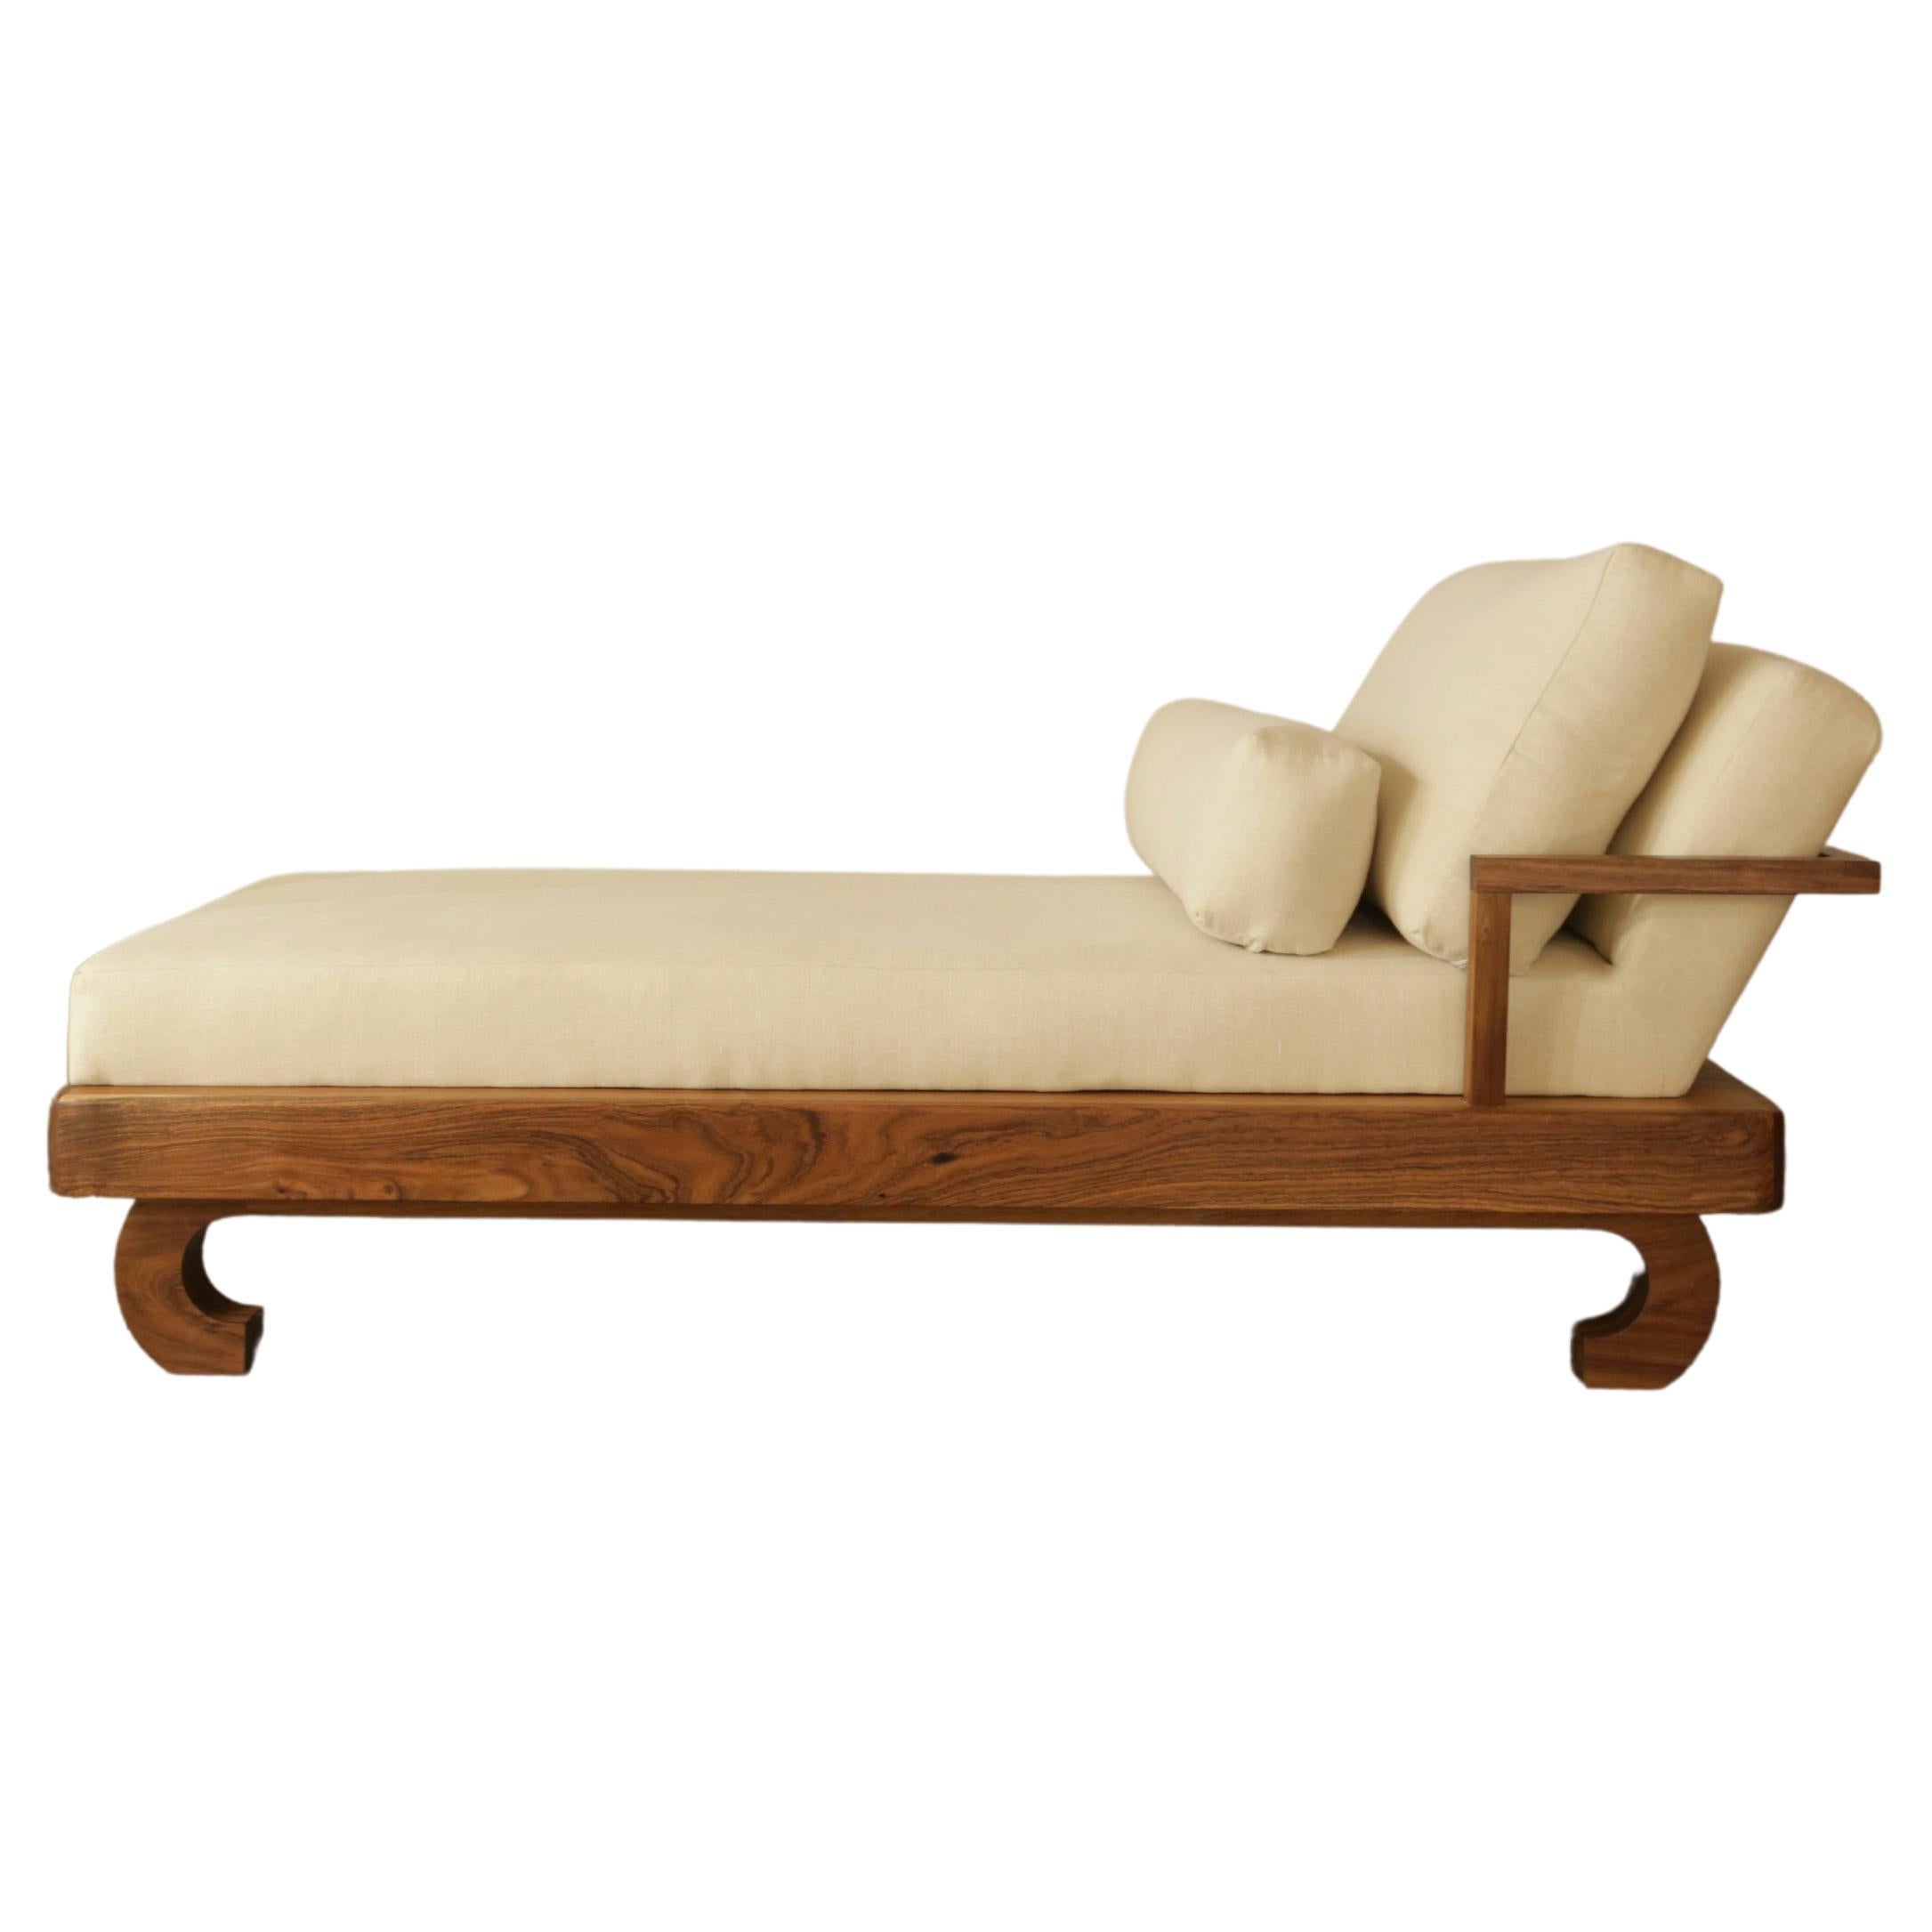 Marruecos individual daybed by Tana Karei For Sale